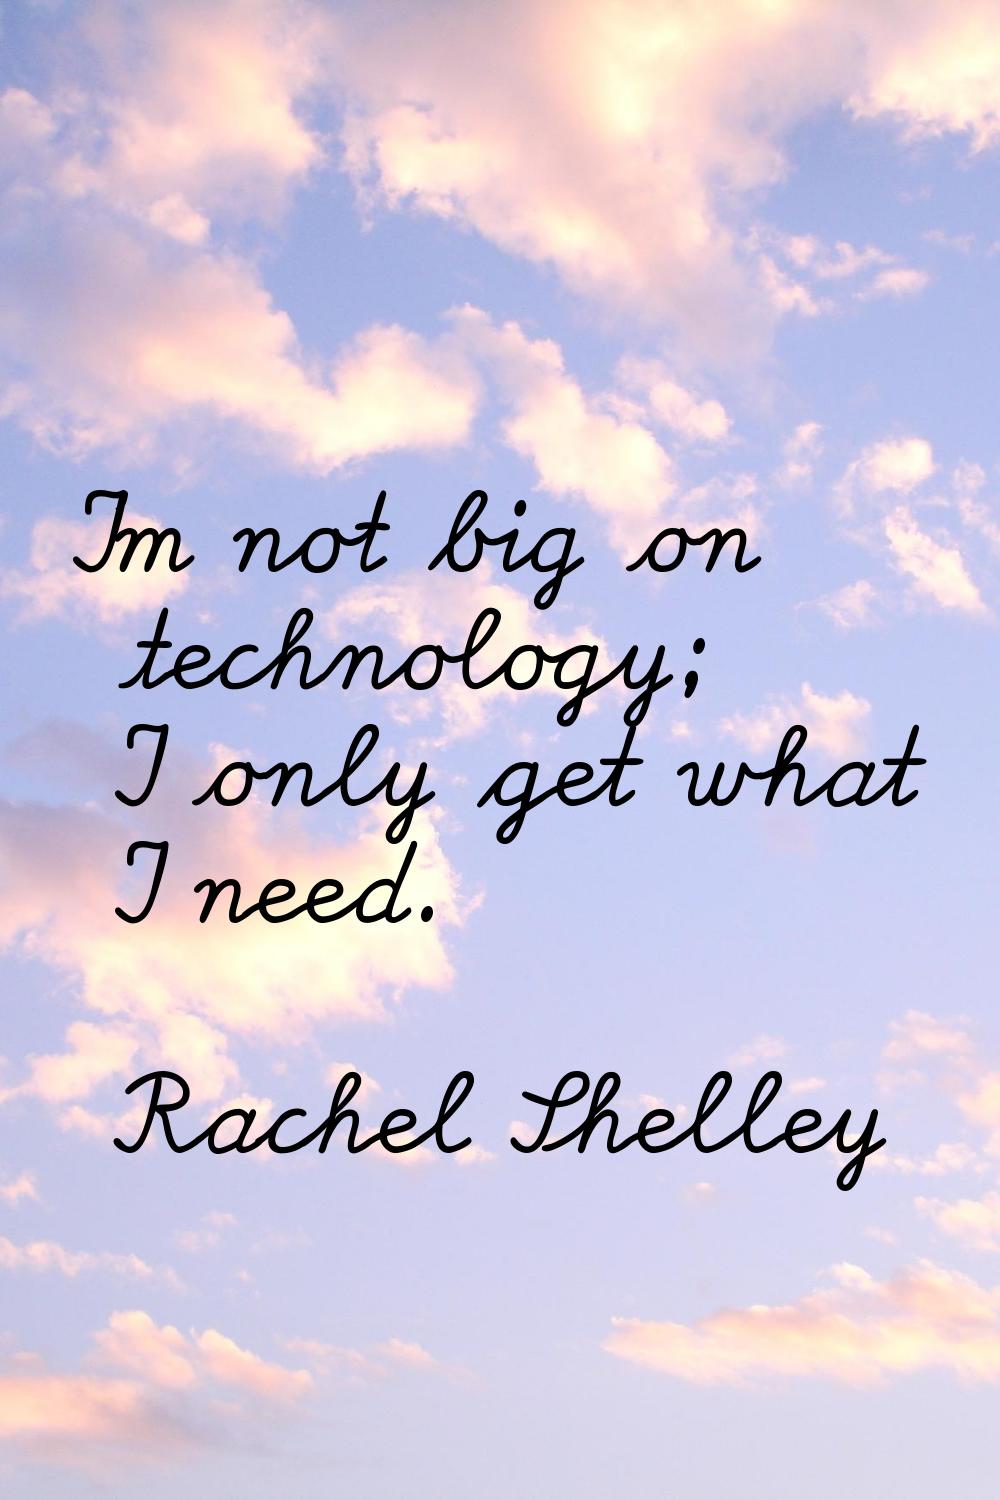 I'm not big on technology; I only get what I need.